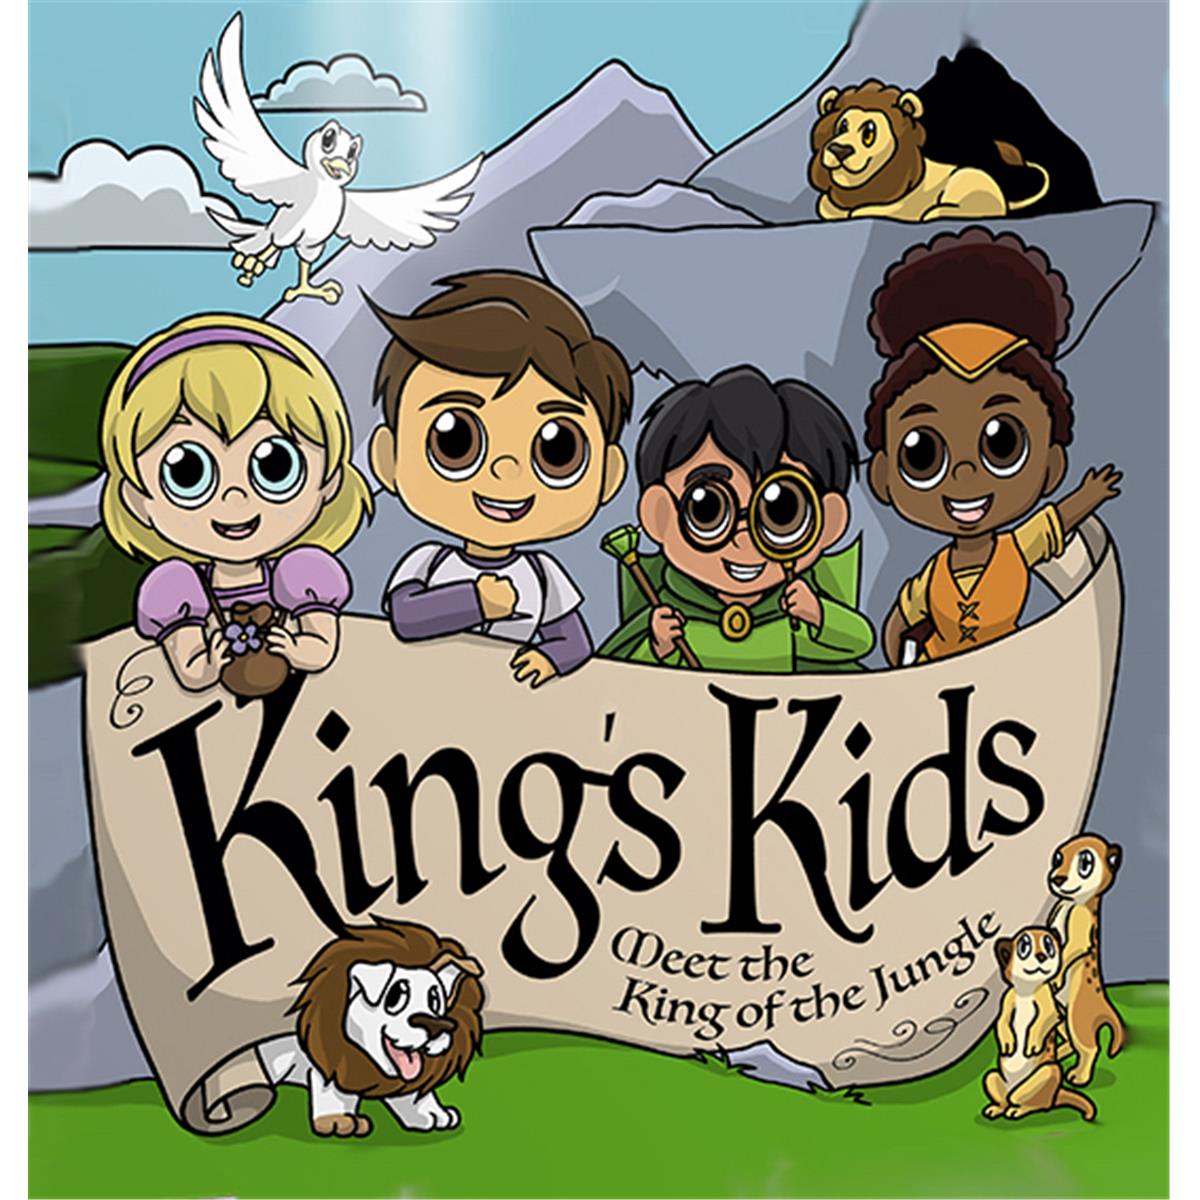 Kings Kids Books 139728 Kings Kids Meet The King Of The Jungle - Ages 2-8 Years